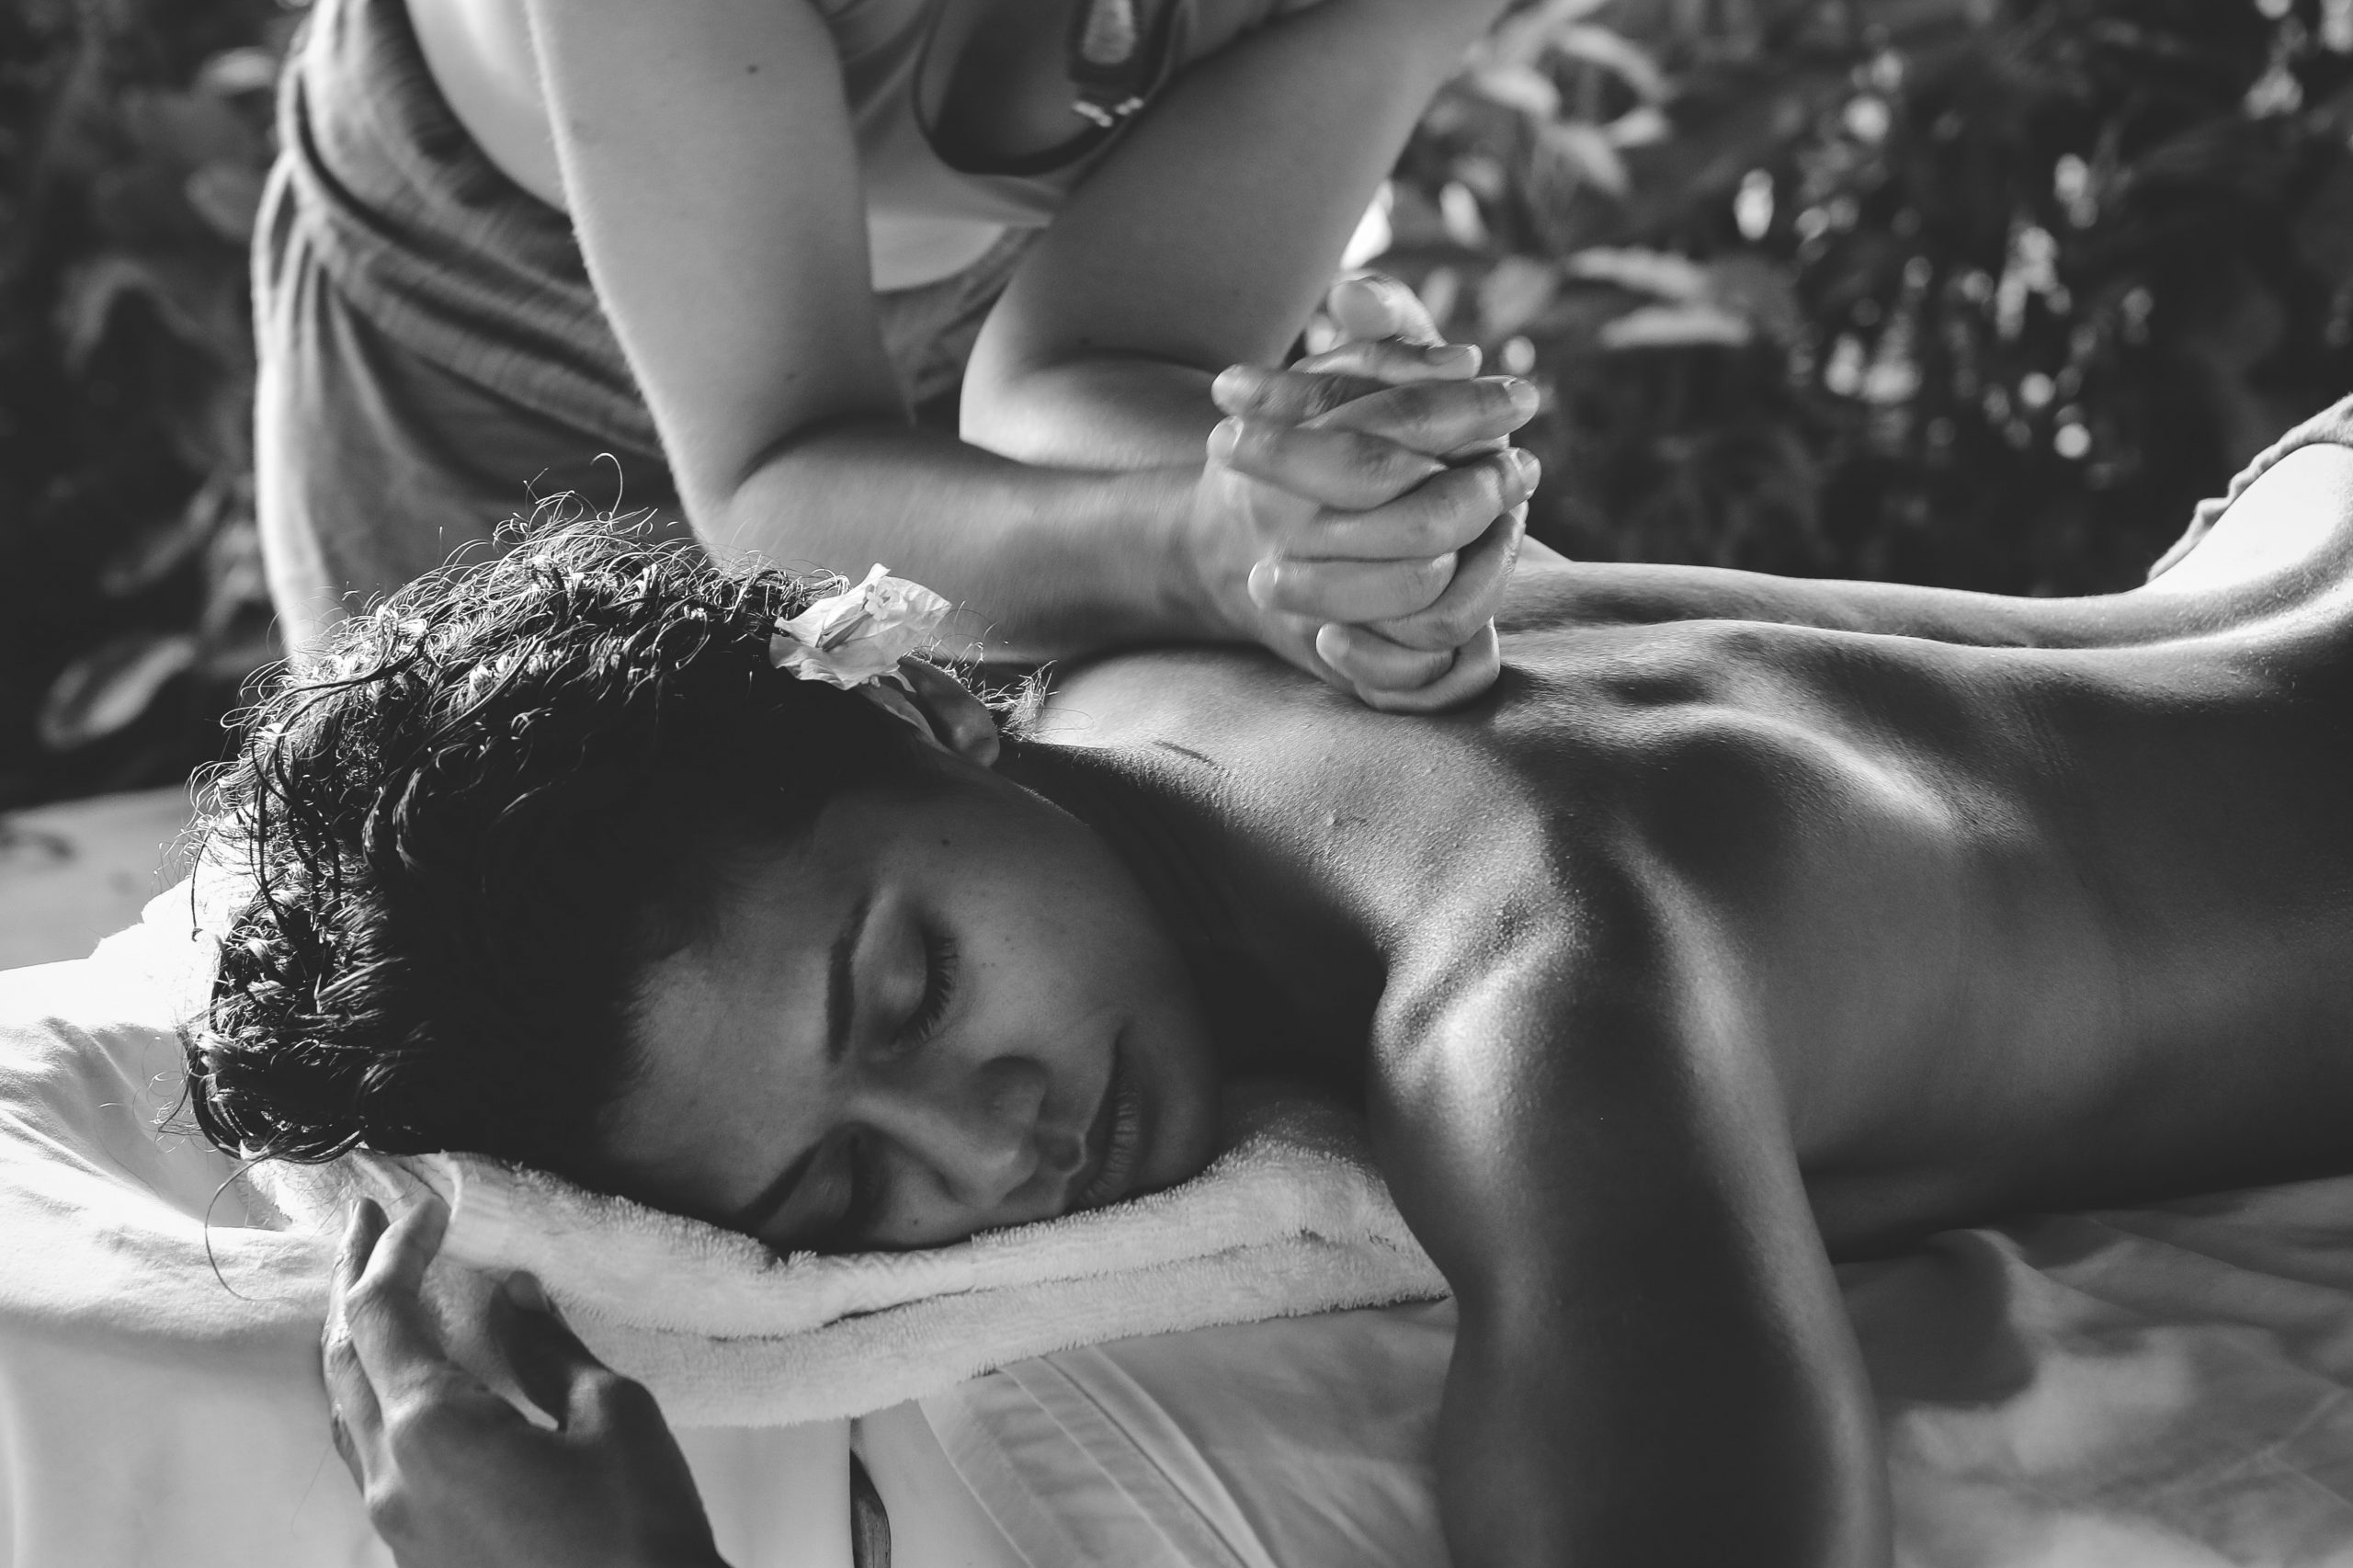 A woman with flower in ear getting back massage